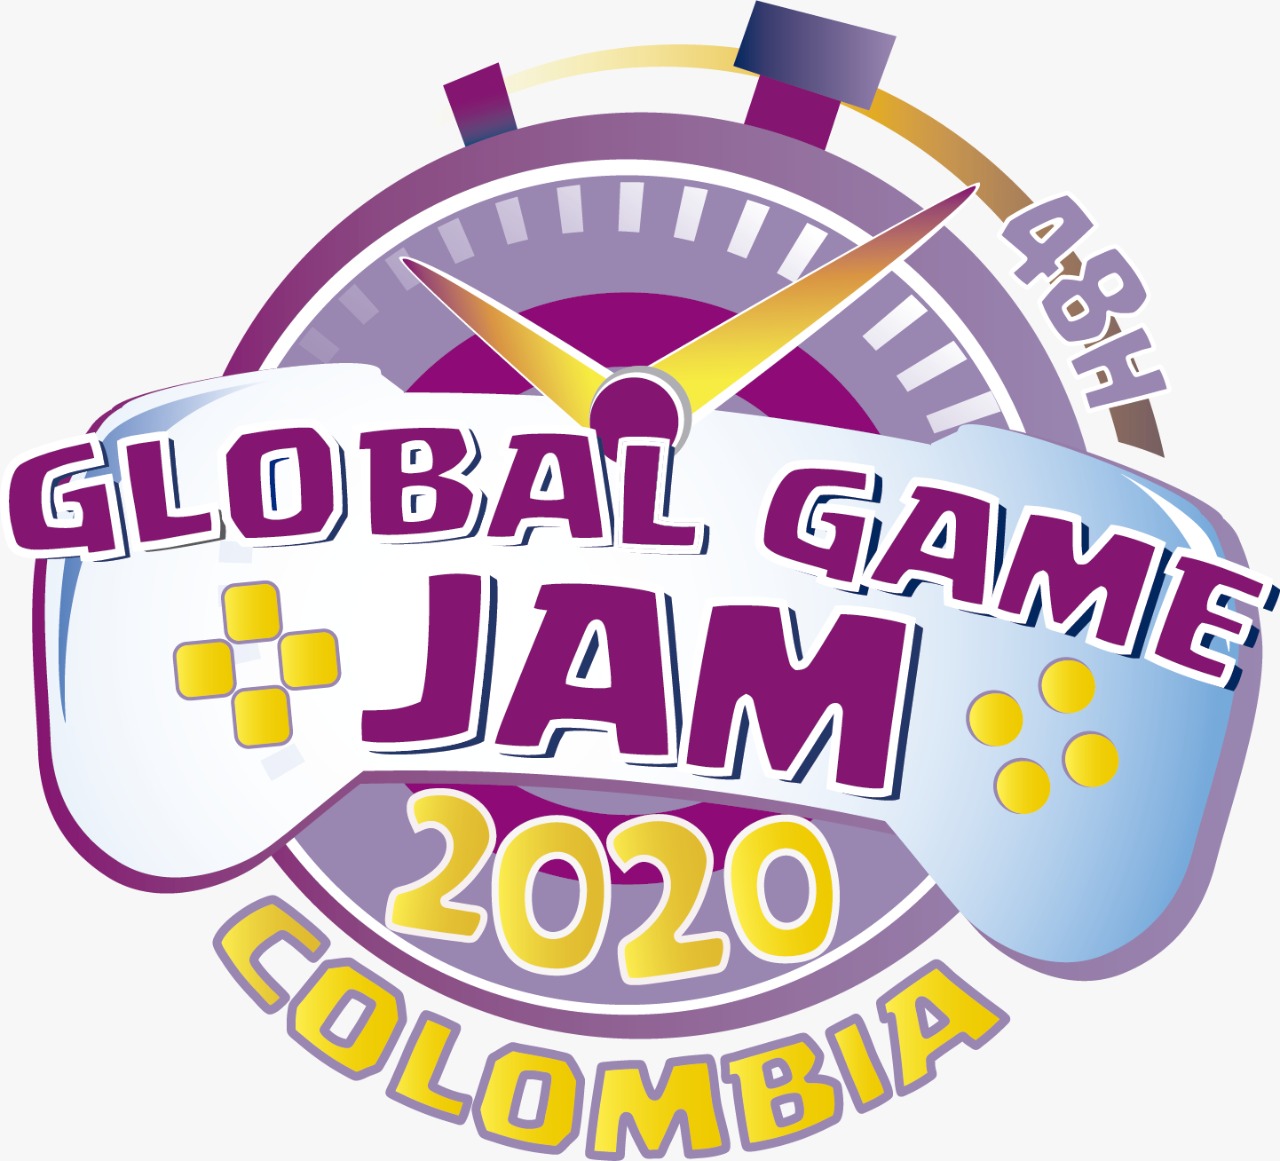 Global Game Jam Colombia